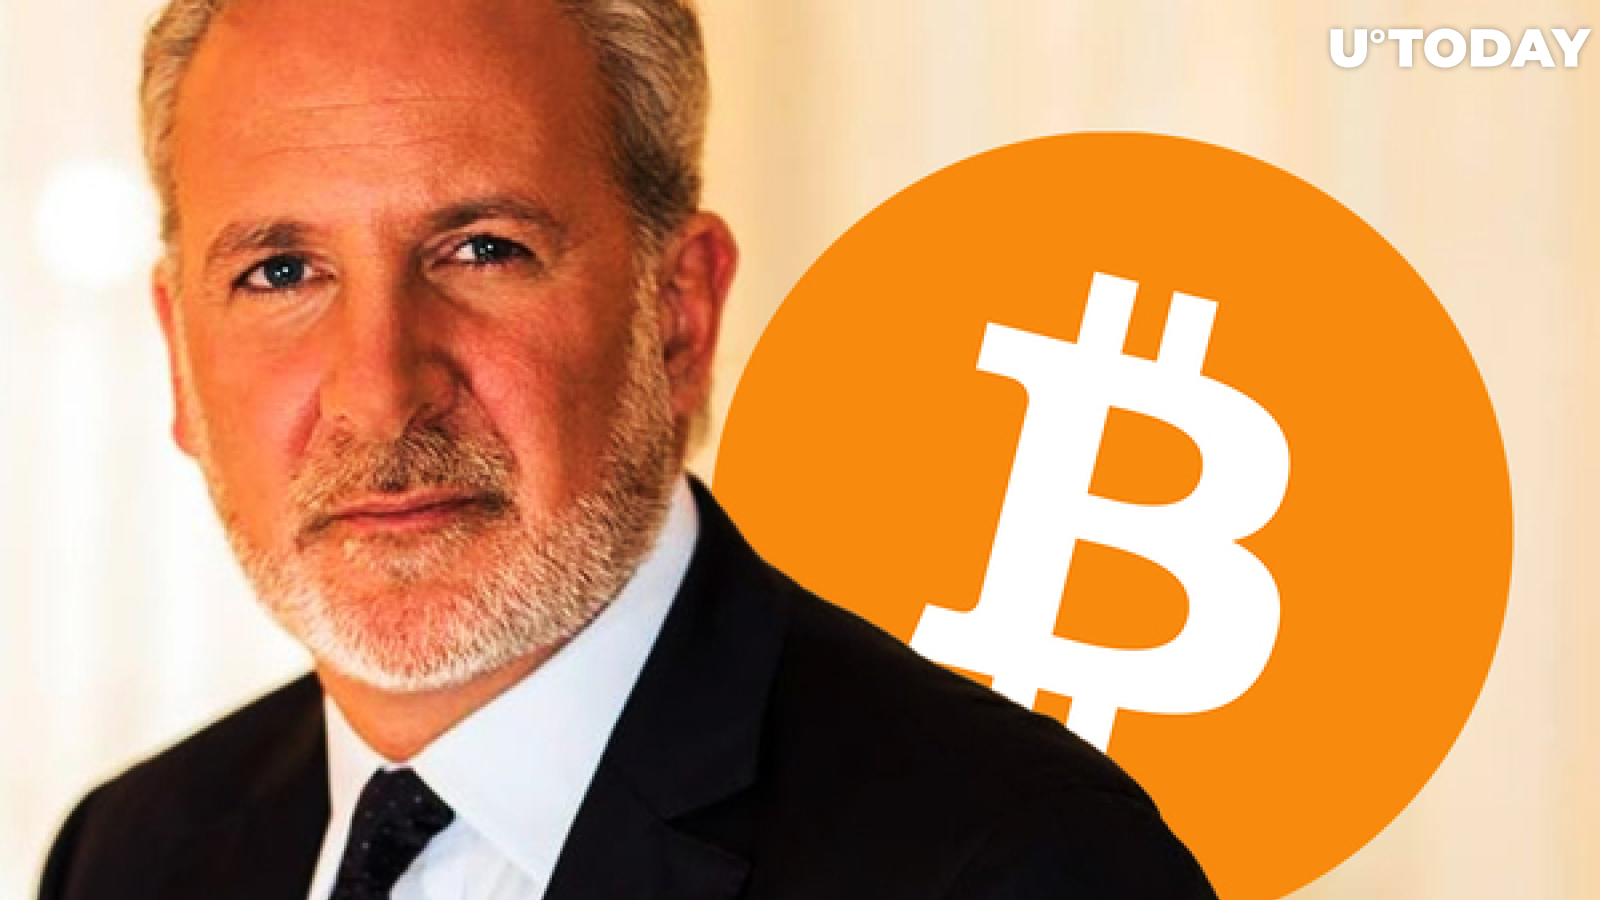 Peter Schiff’s Son Goes 100% on Bitcoin, He Is “HODLing to Infinity or Bust”